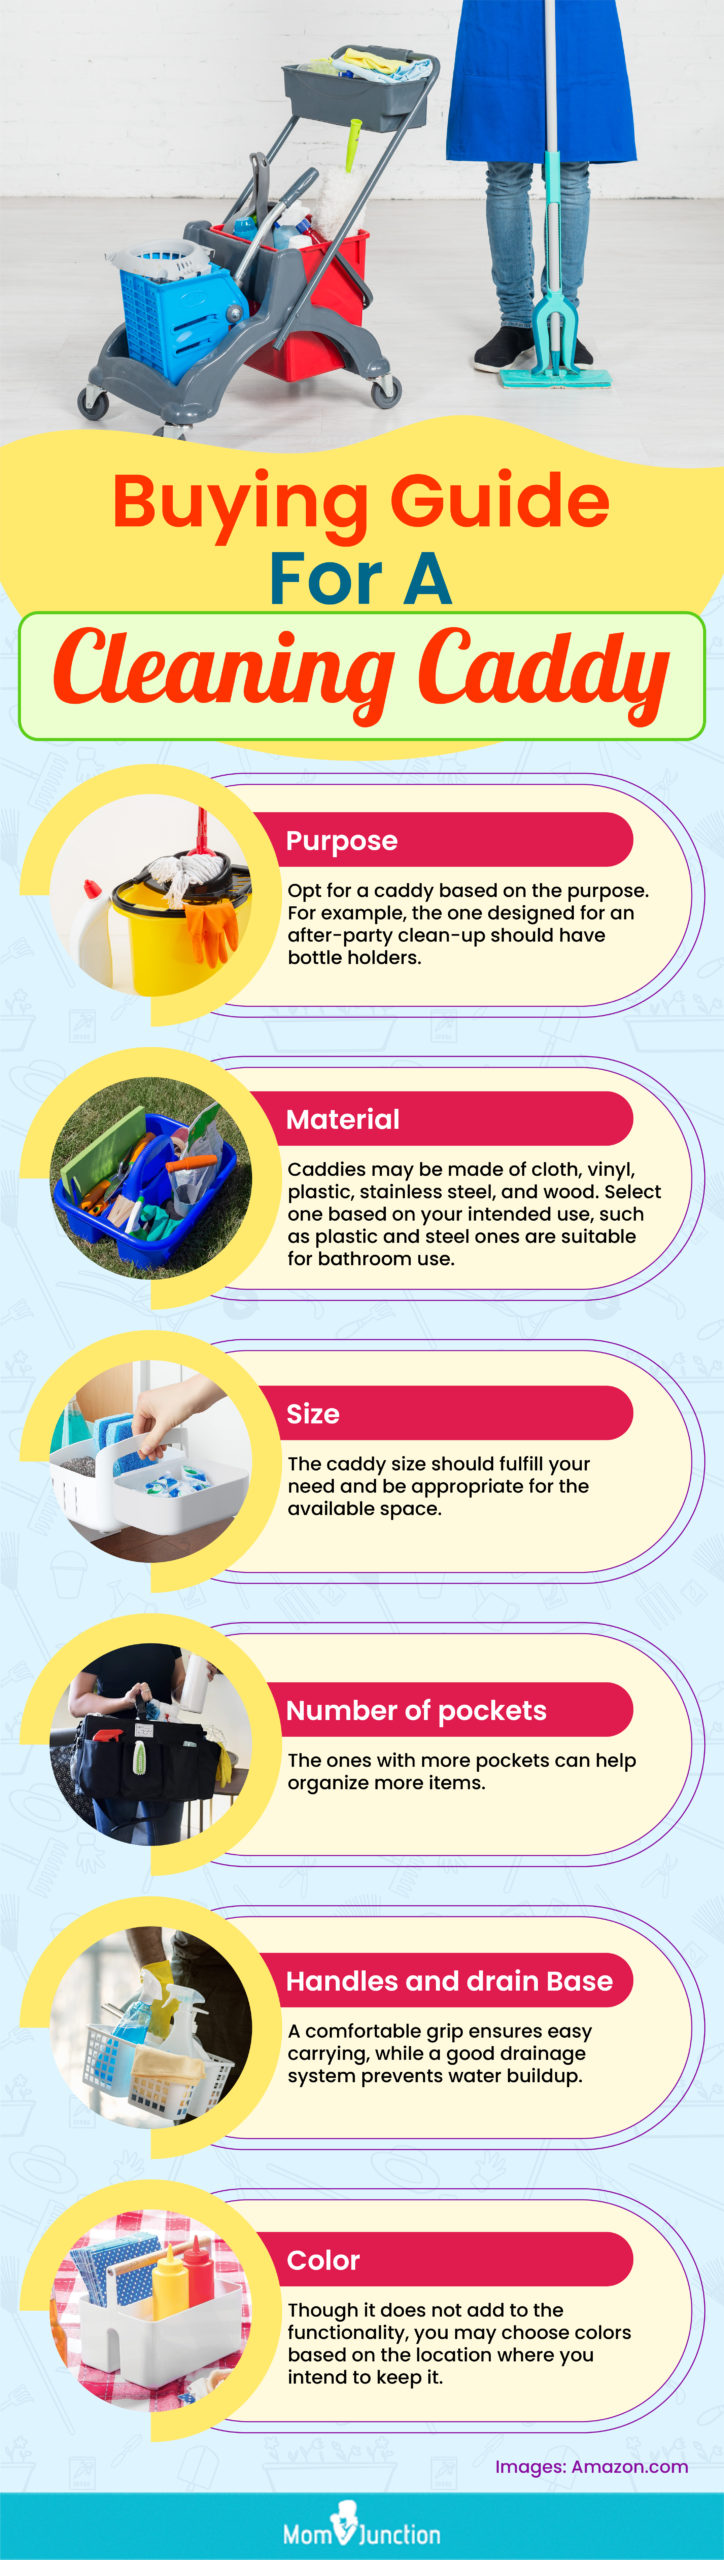 Buying Guide For A Cleaning Caddy (infographic)